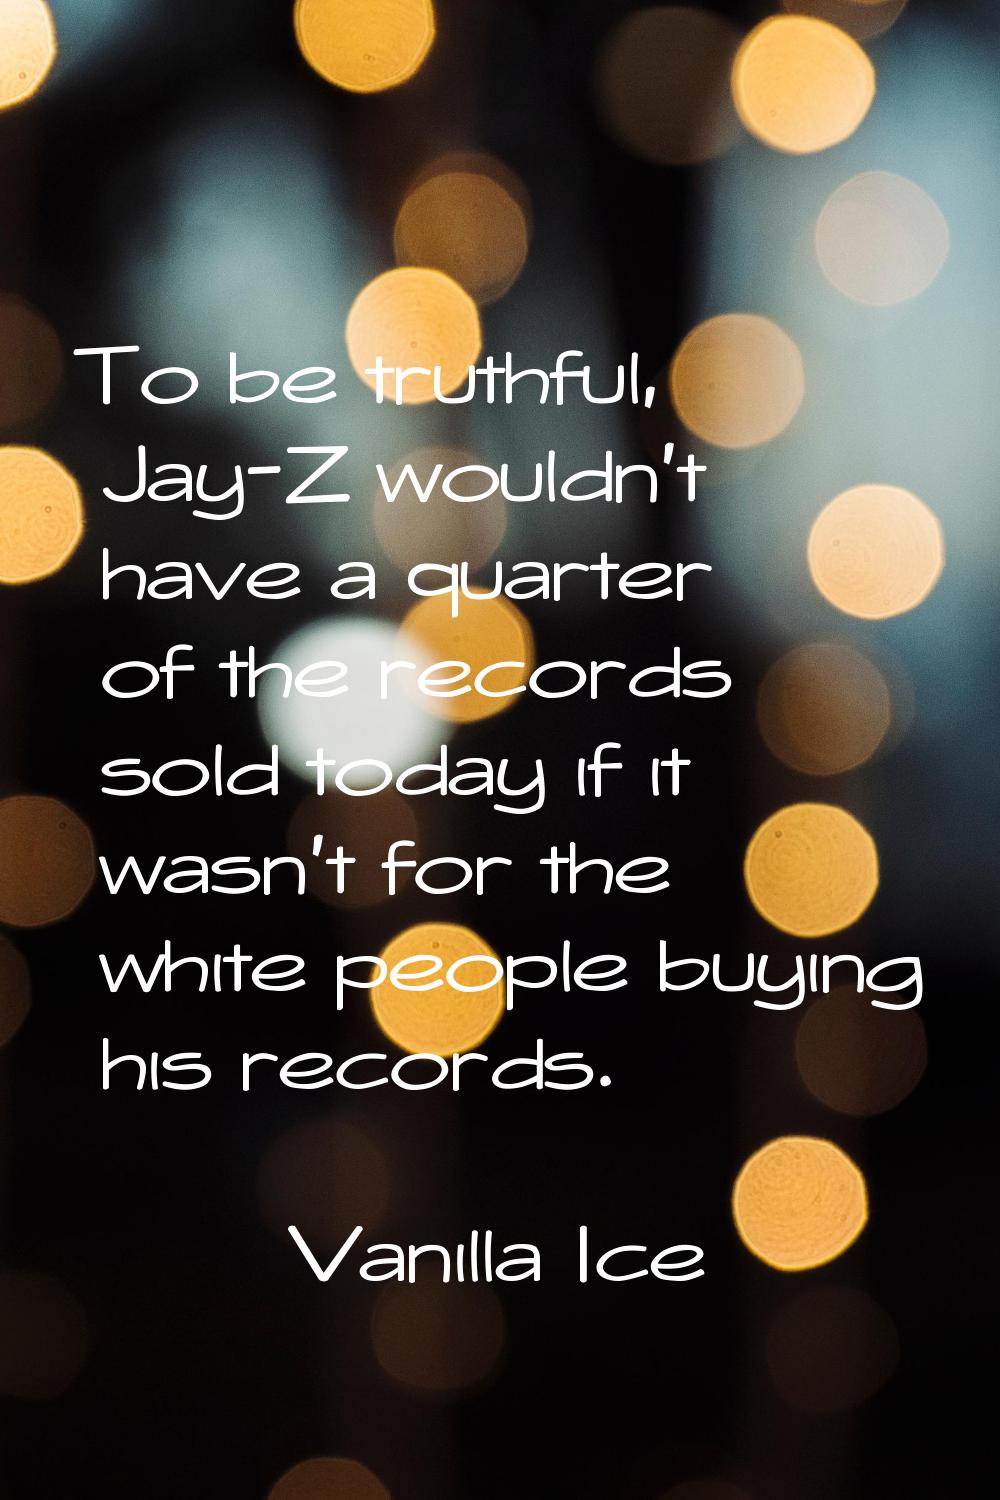 To be truthful, Jay-Z wouldn't have a quarter of the records sold today if it wasn't for the white 